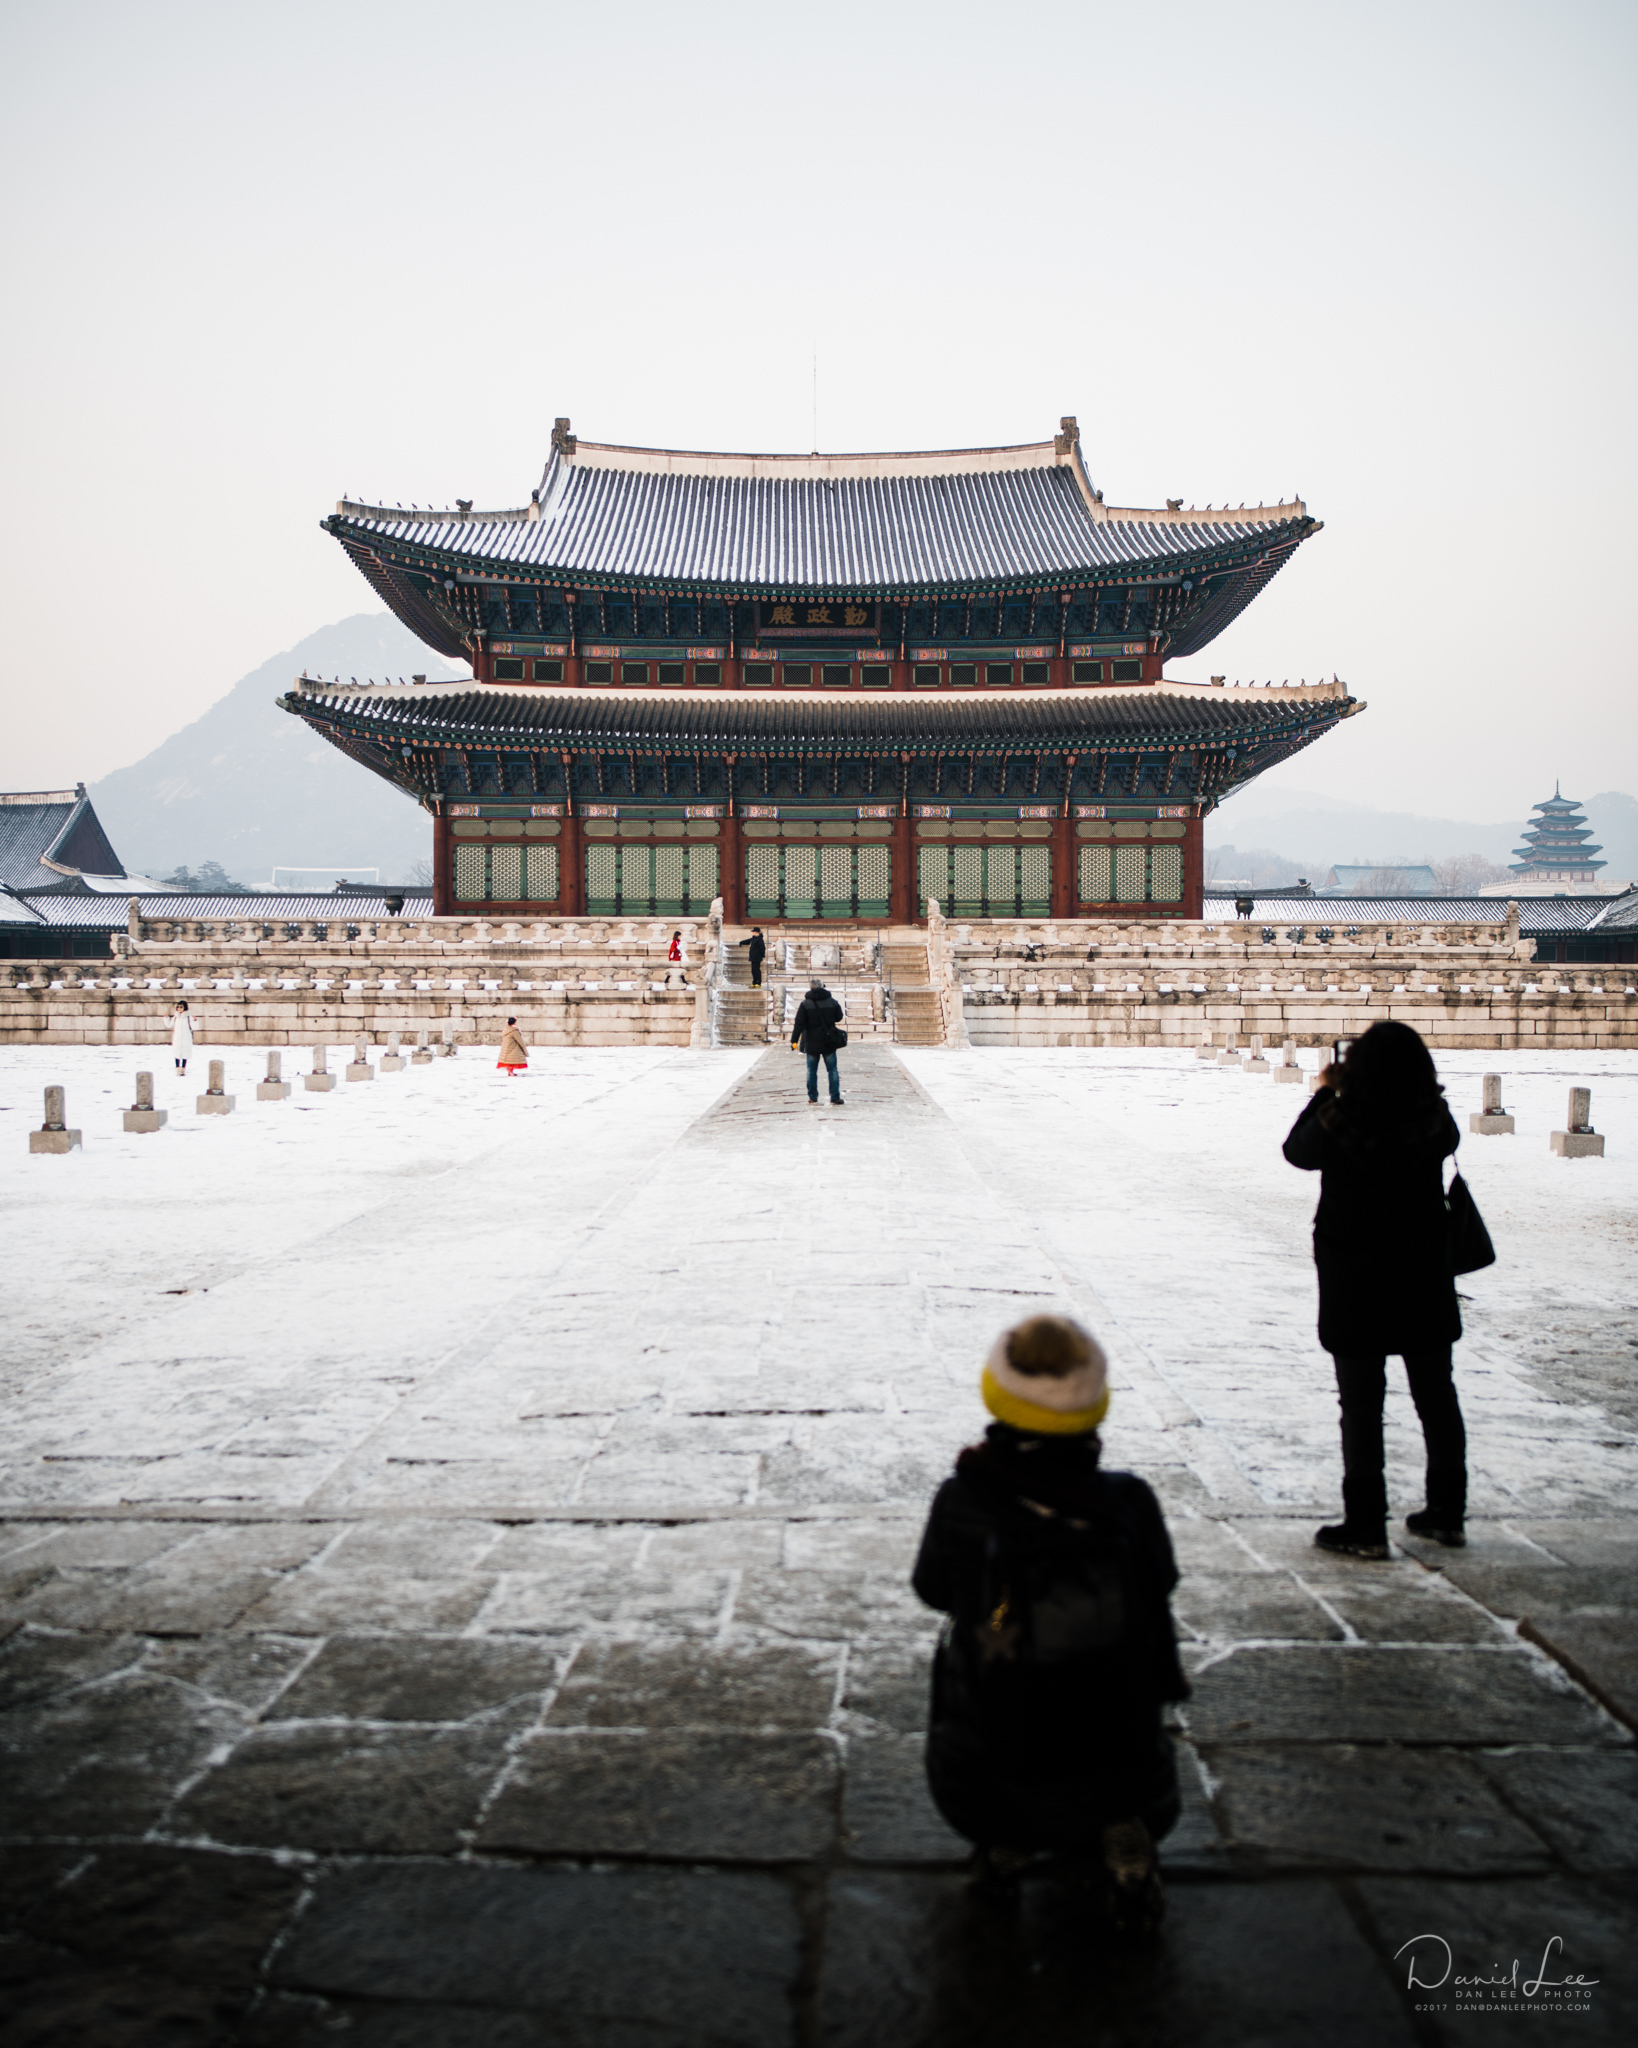  Tourists get their last minute photos at Gyeongbukgung before the doors close for the day. Seoul, Republic of Korea. Photo by Daniel Lee. 